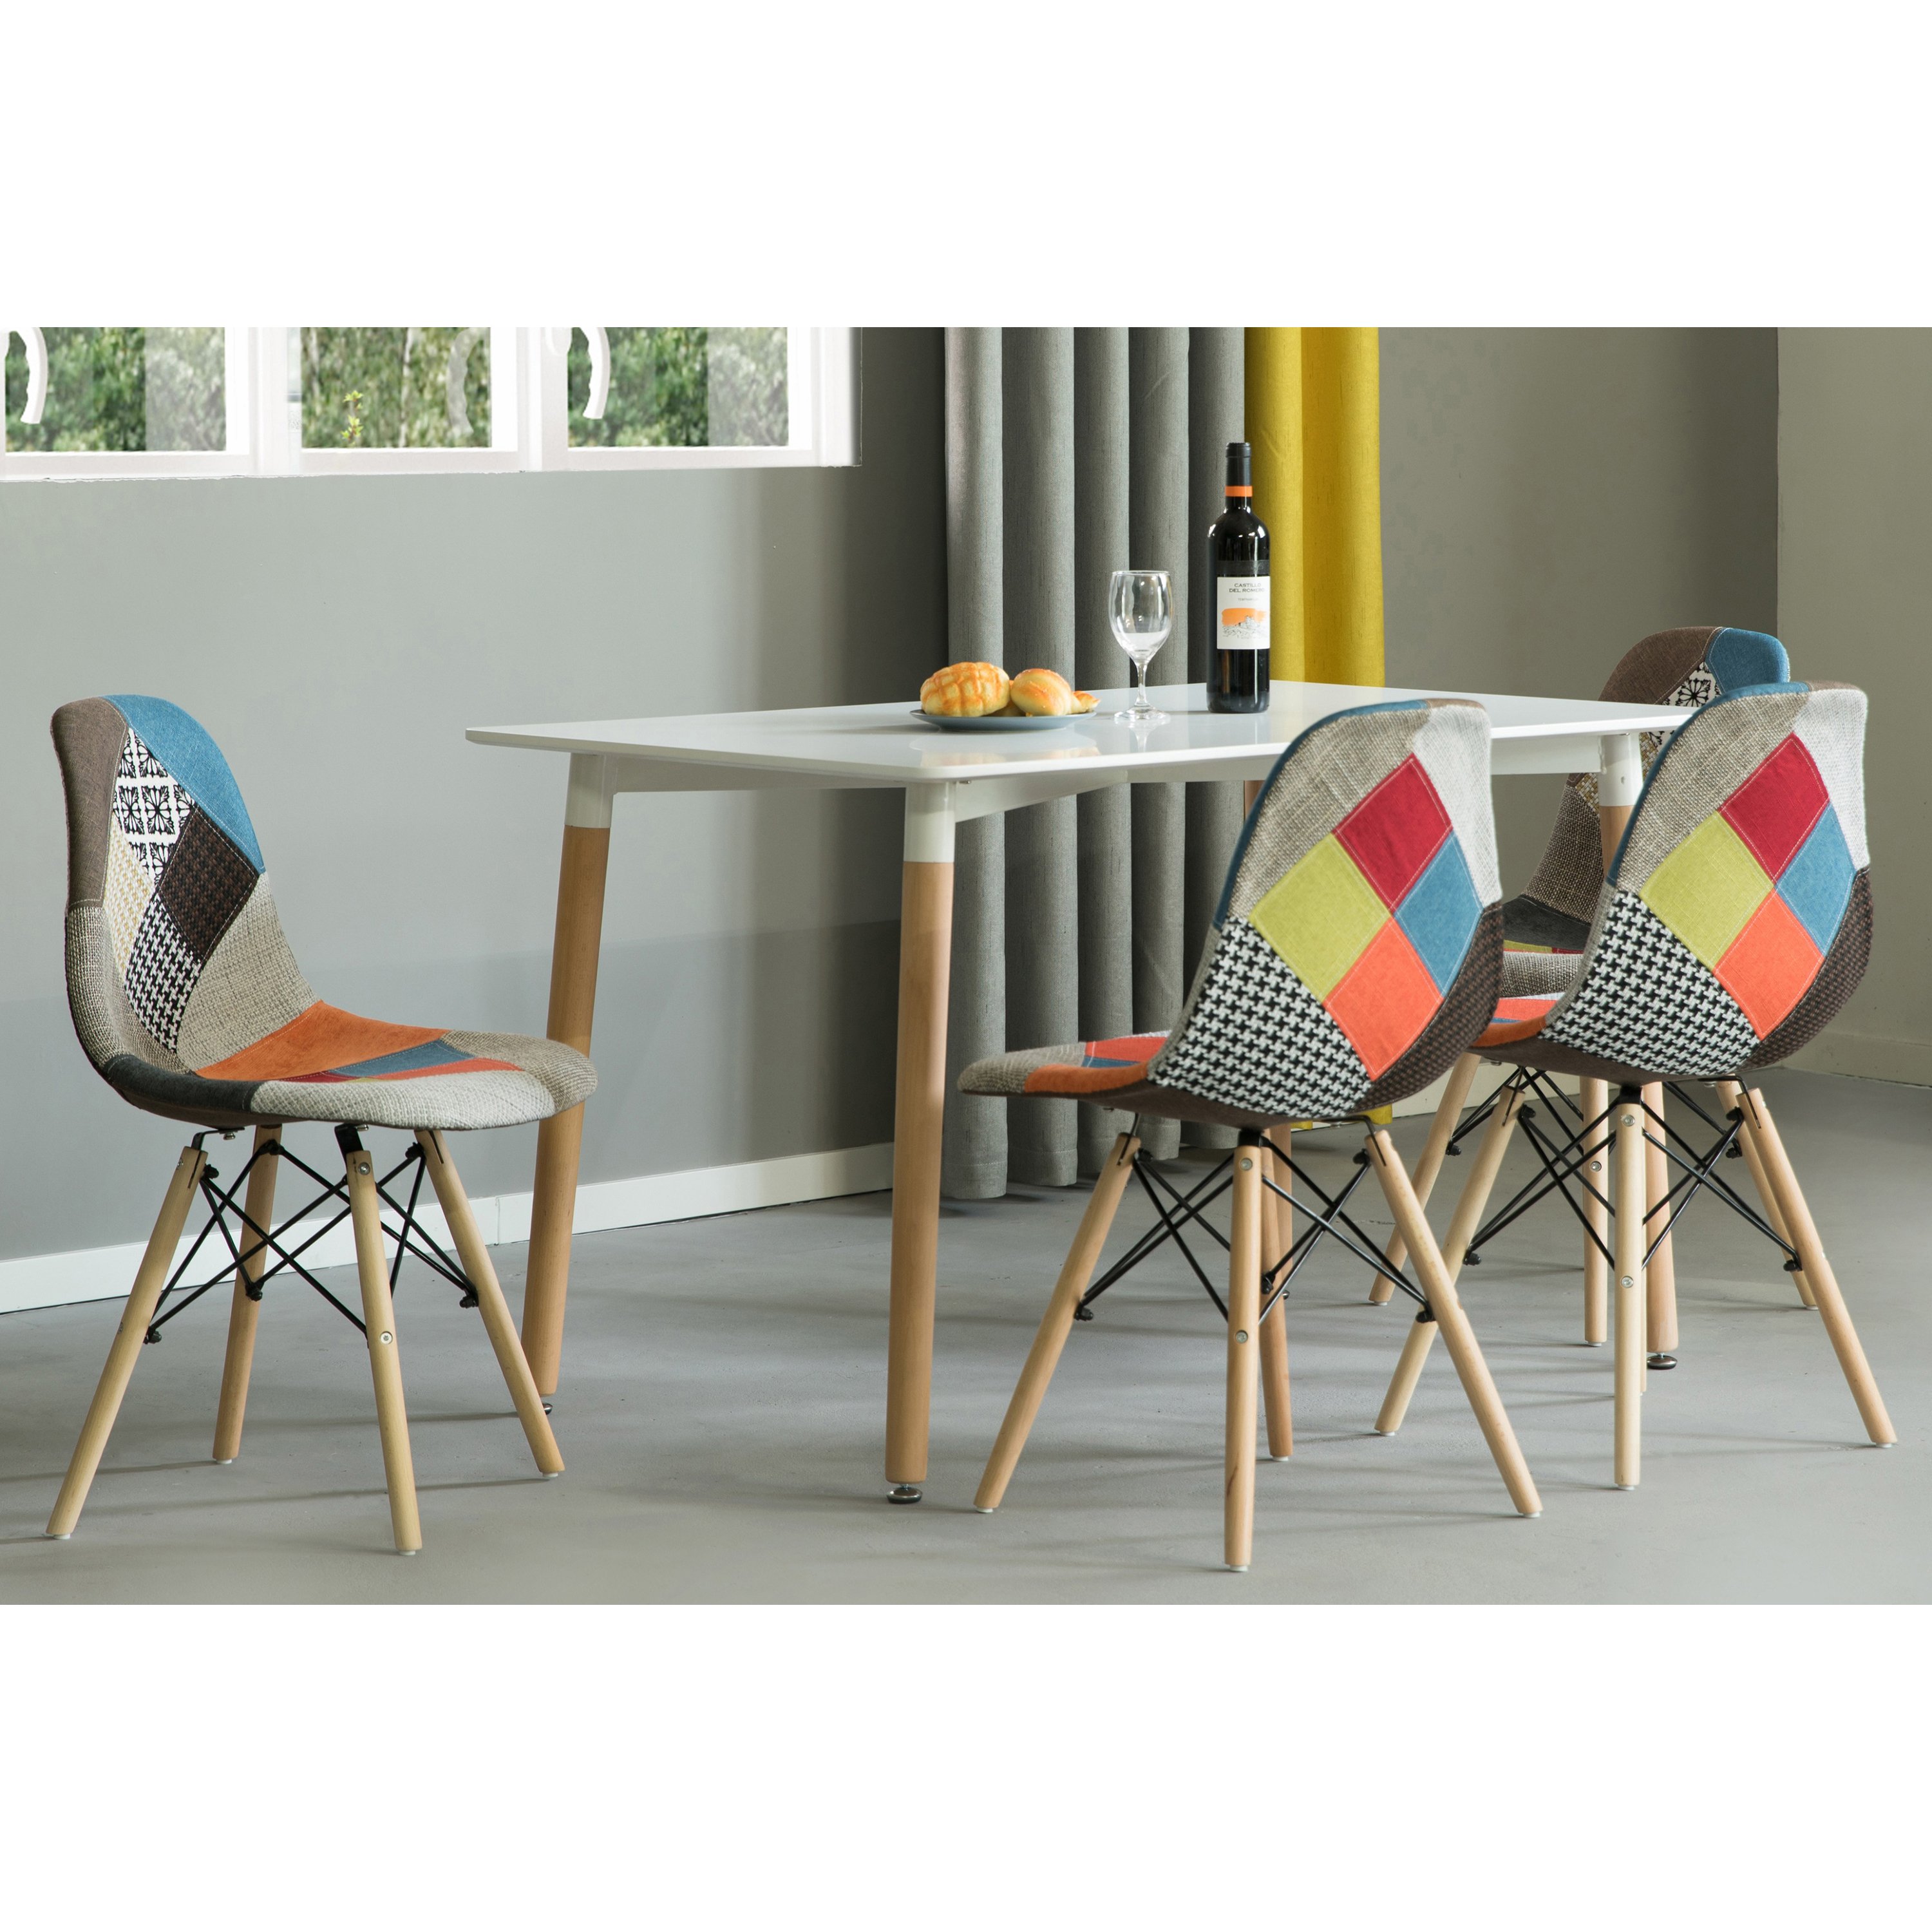 Mid-Century Modern Upholstered Plastic Multicolor Fabric Patchwork DSW Shell Dining Chair With Wooden Dowel Eiffel Legs - Single